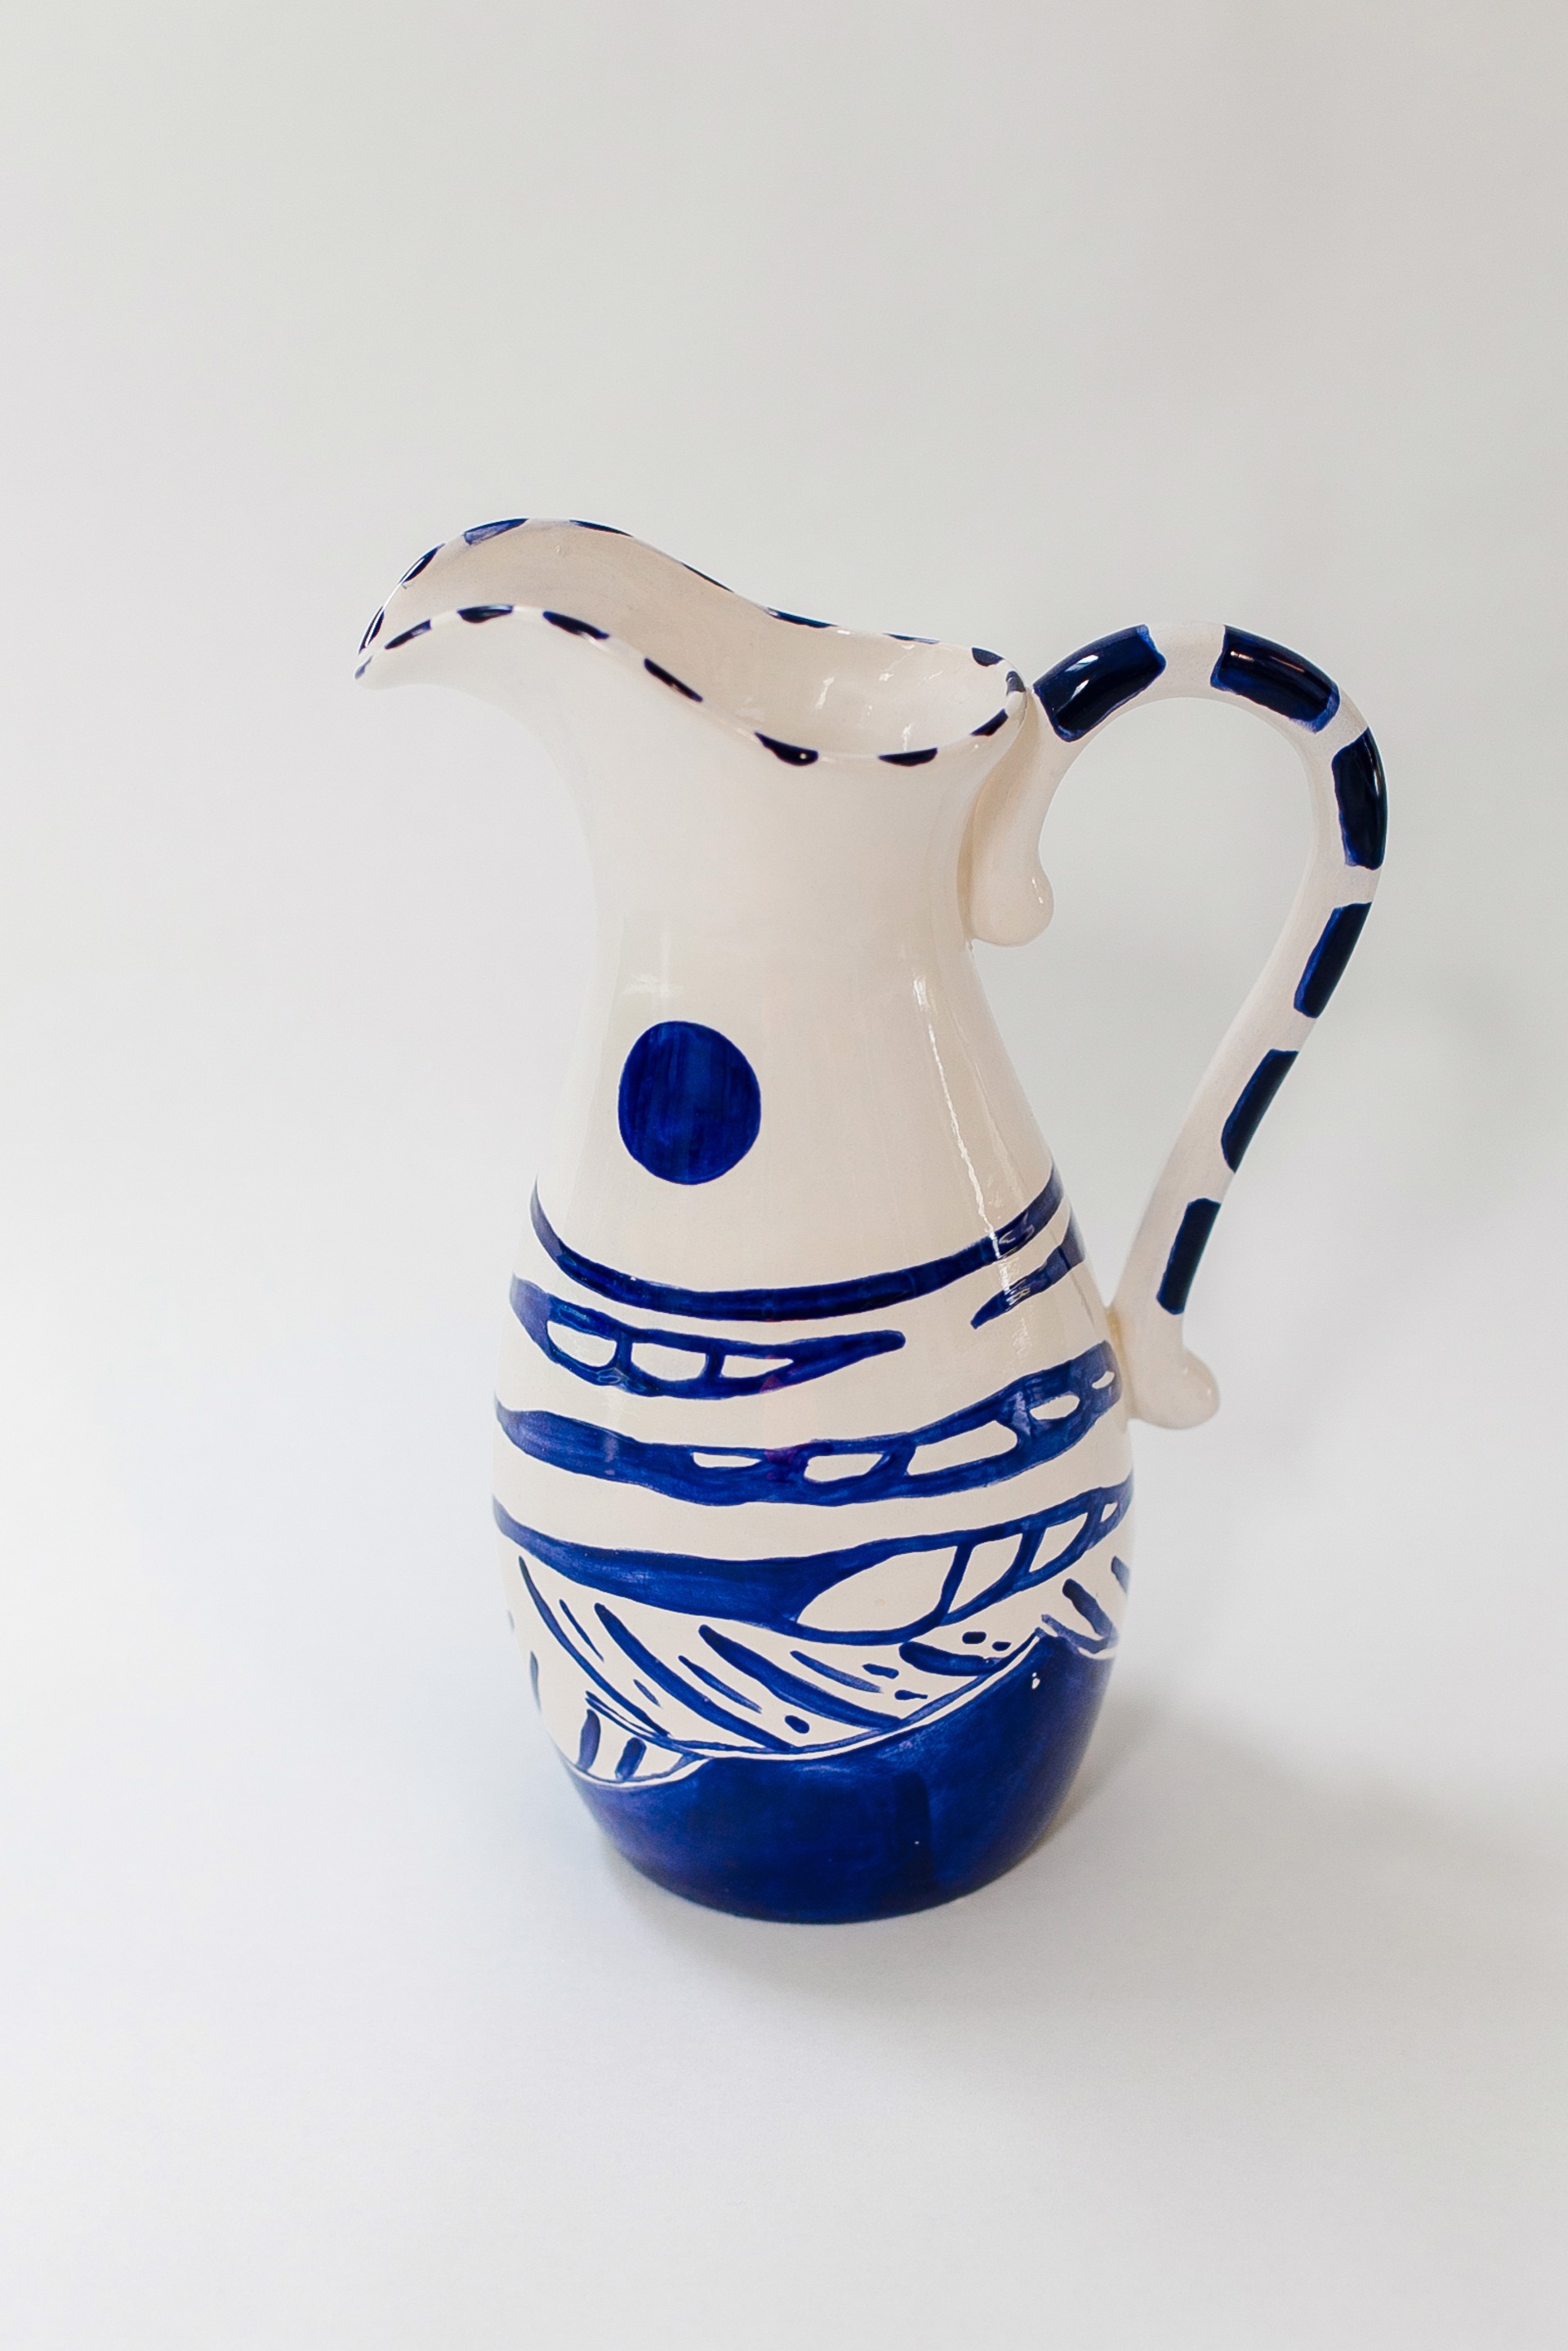 Blue Moon Pitcher by Andrea Naylor